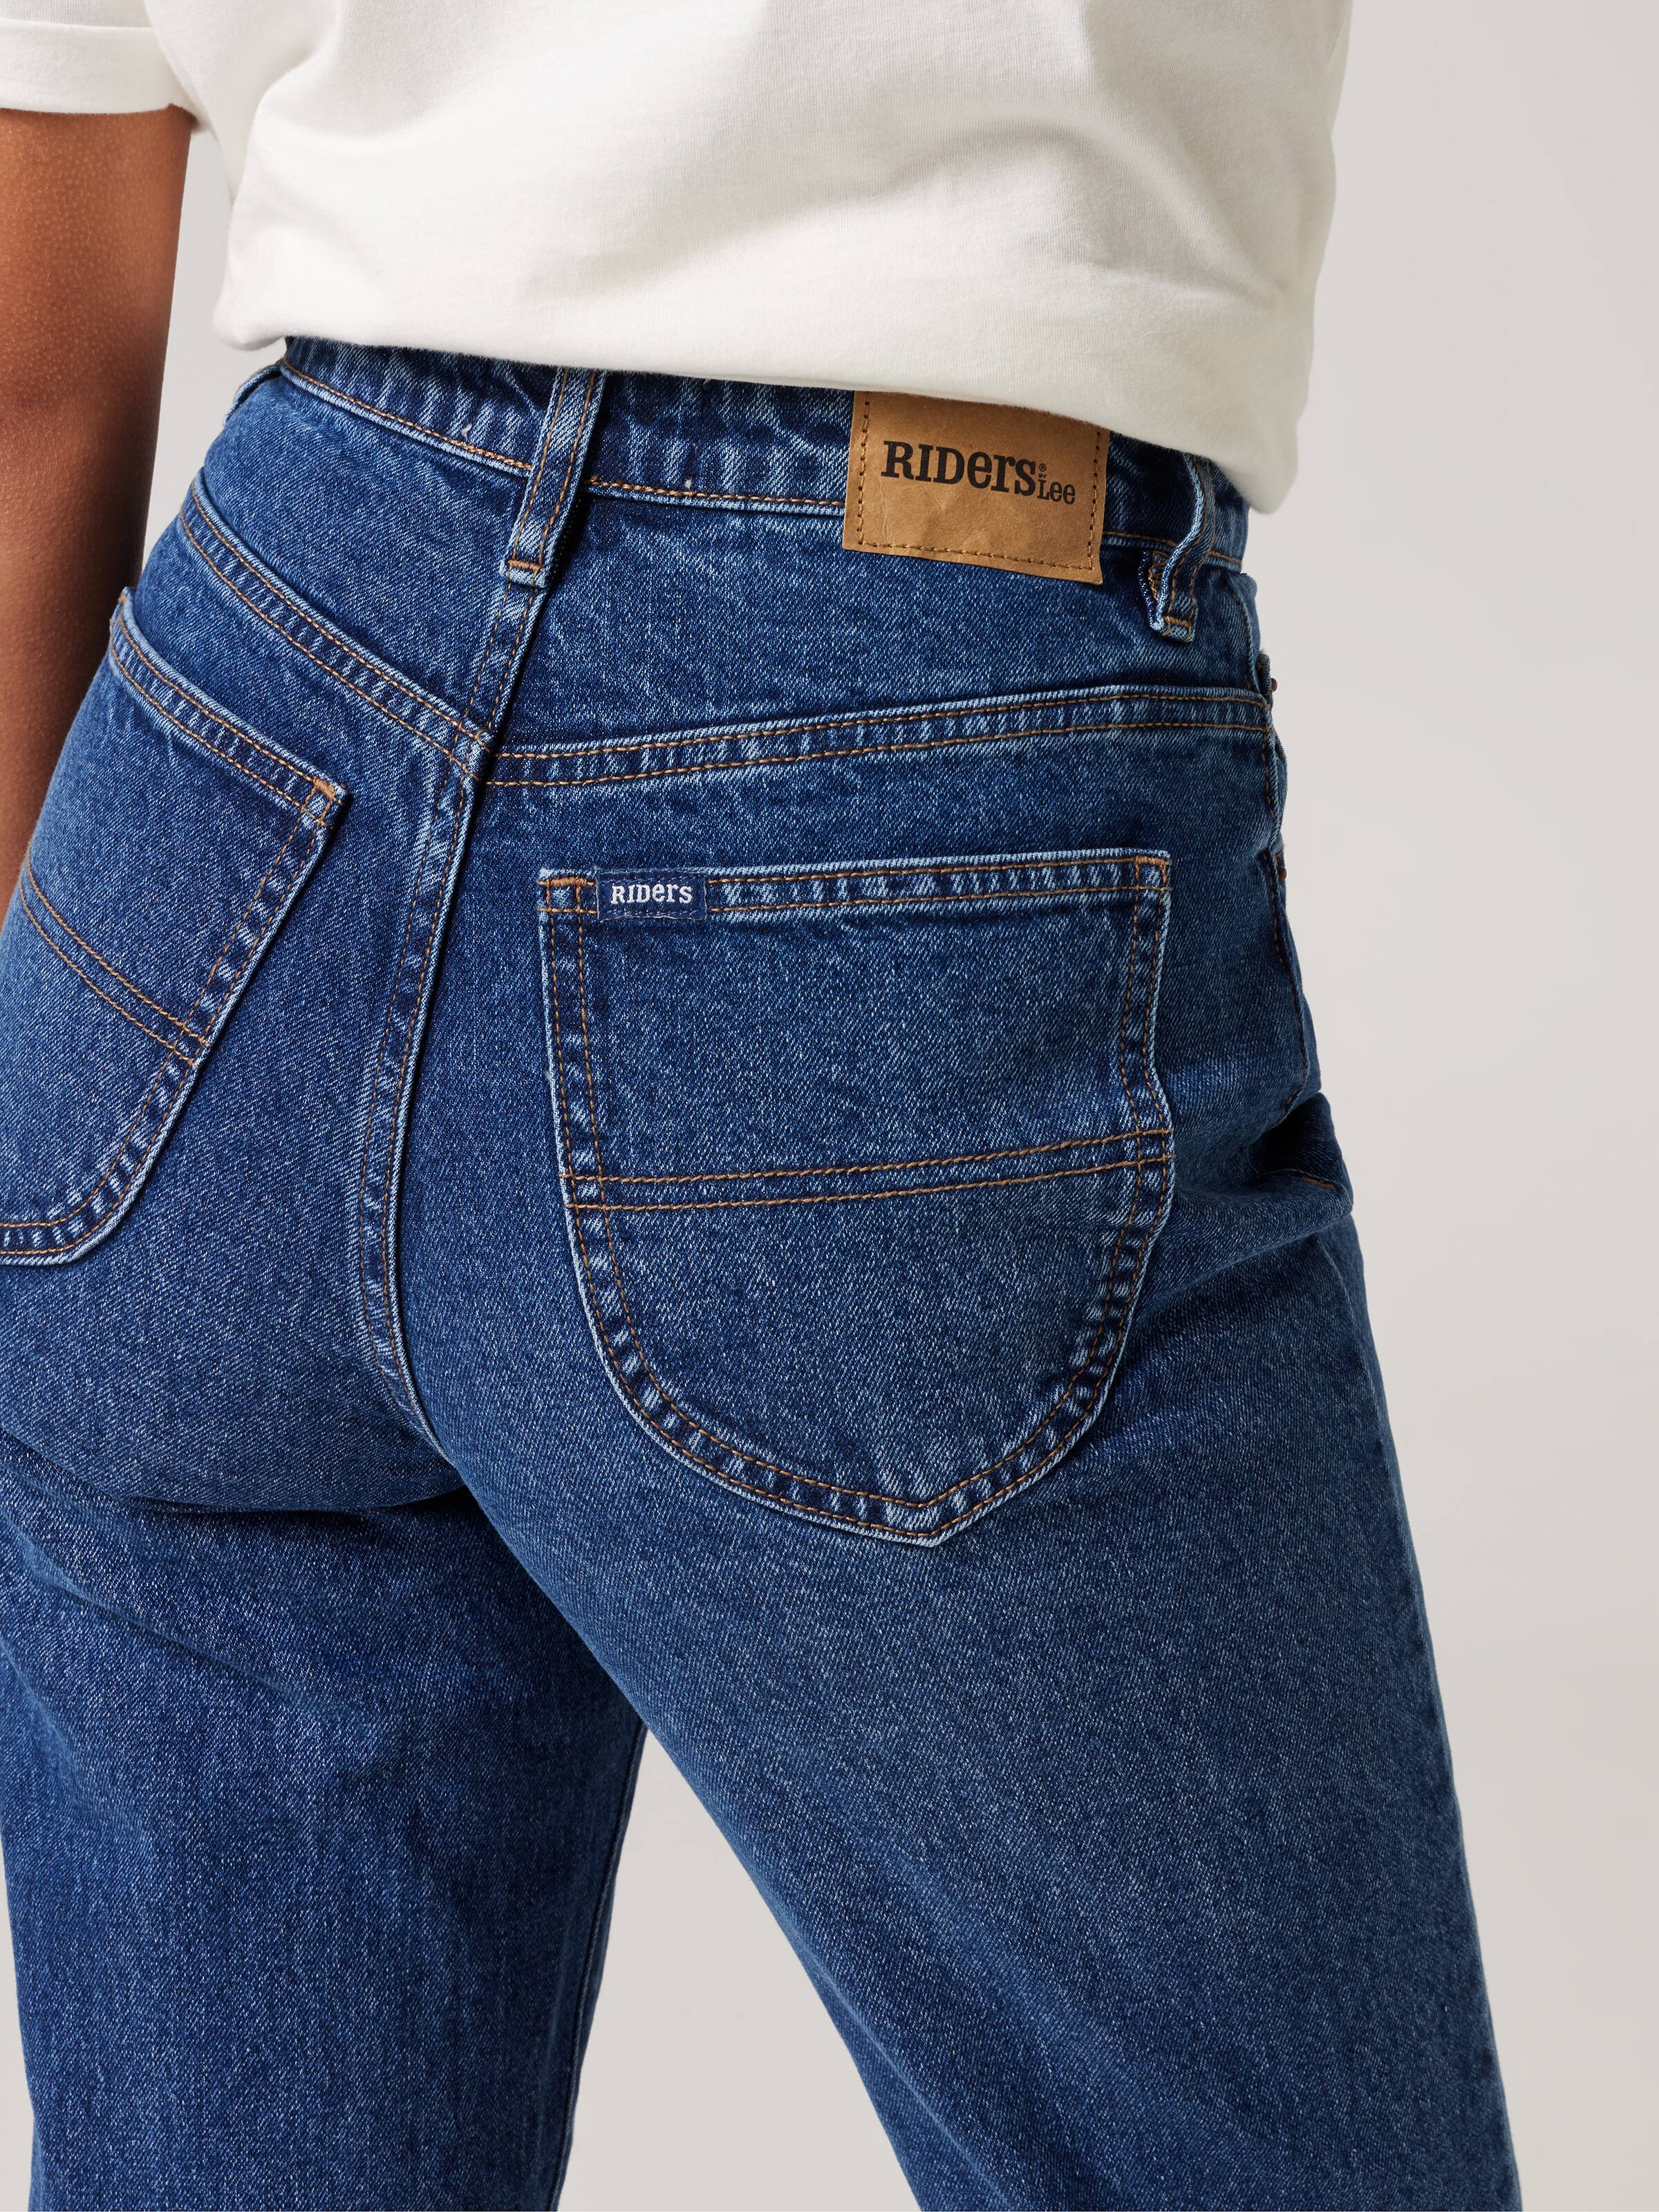 Women's Riders Lee | Just Jeans